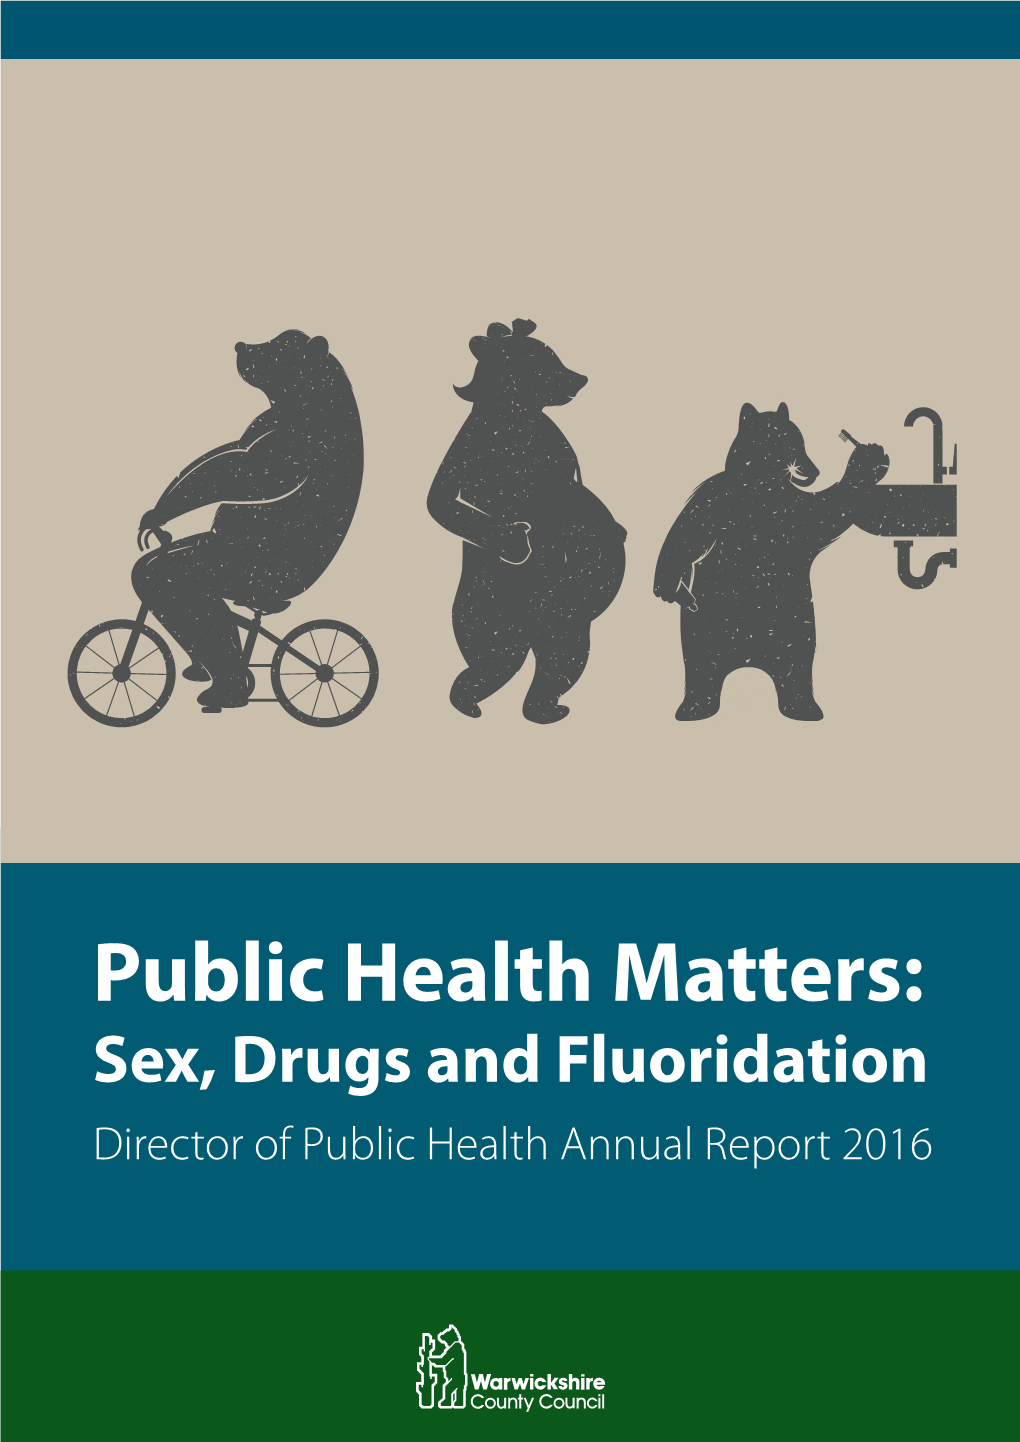 Public Health Matters: Sex, Drugs and Fluoridation Director of Public Health Annual Report 2016 Contents